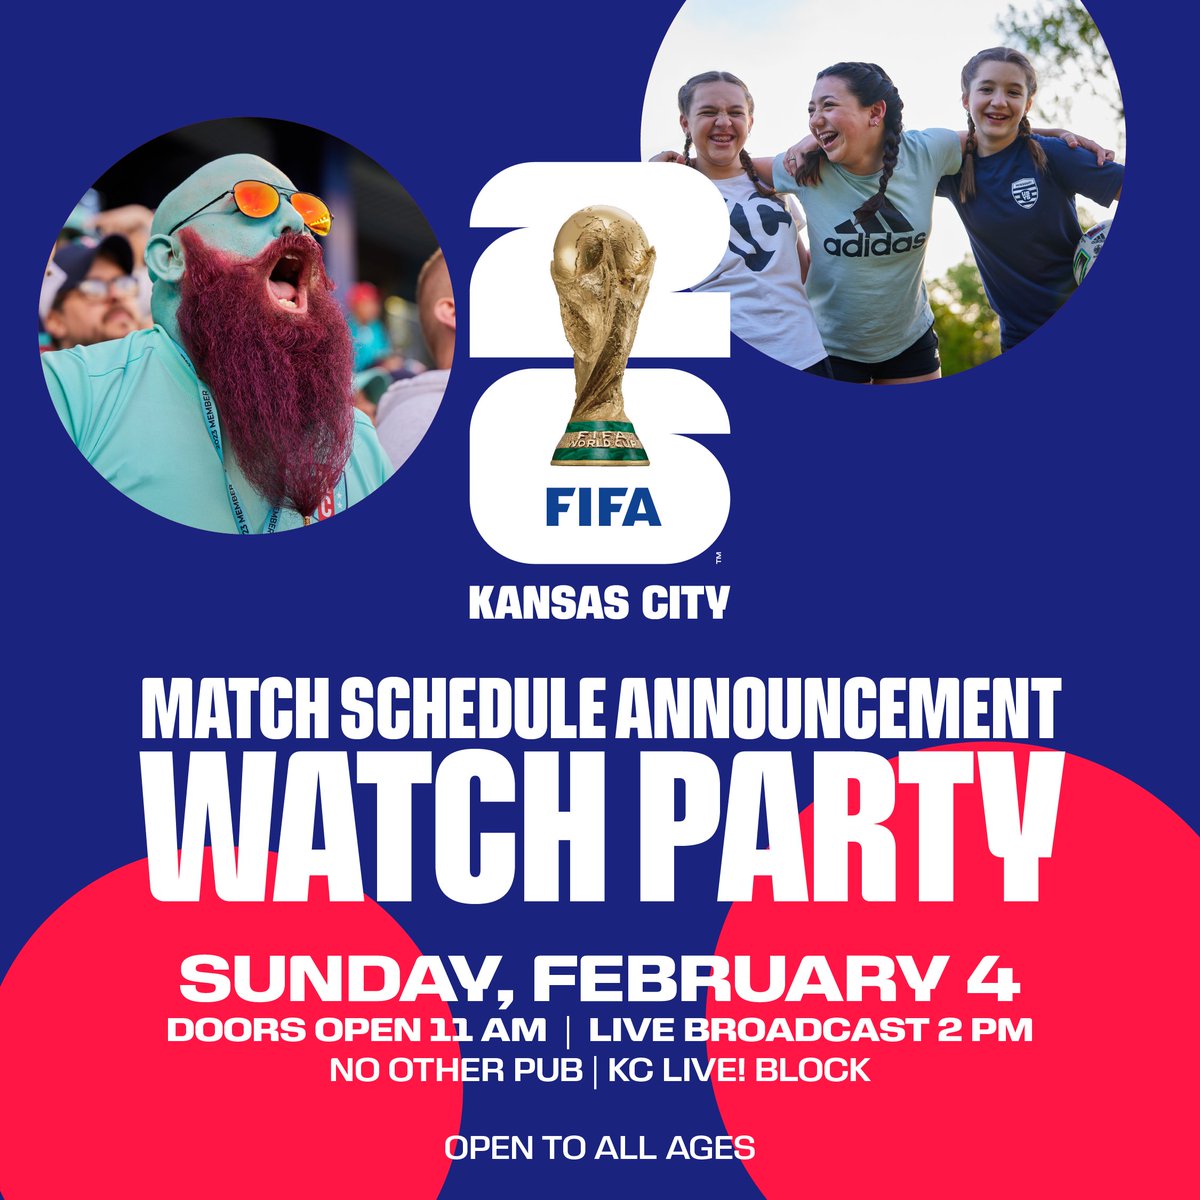 Join #KansasCity26 at No Other Pub this Sunday for an all ages watch party as the #FIFAWorldCup 2026 match schedule and host city allocations are announced! 🗓️ #WeAreKansasCity #WeAre26